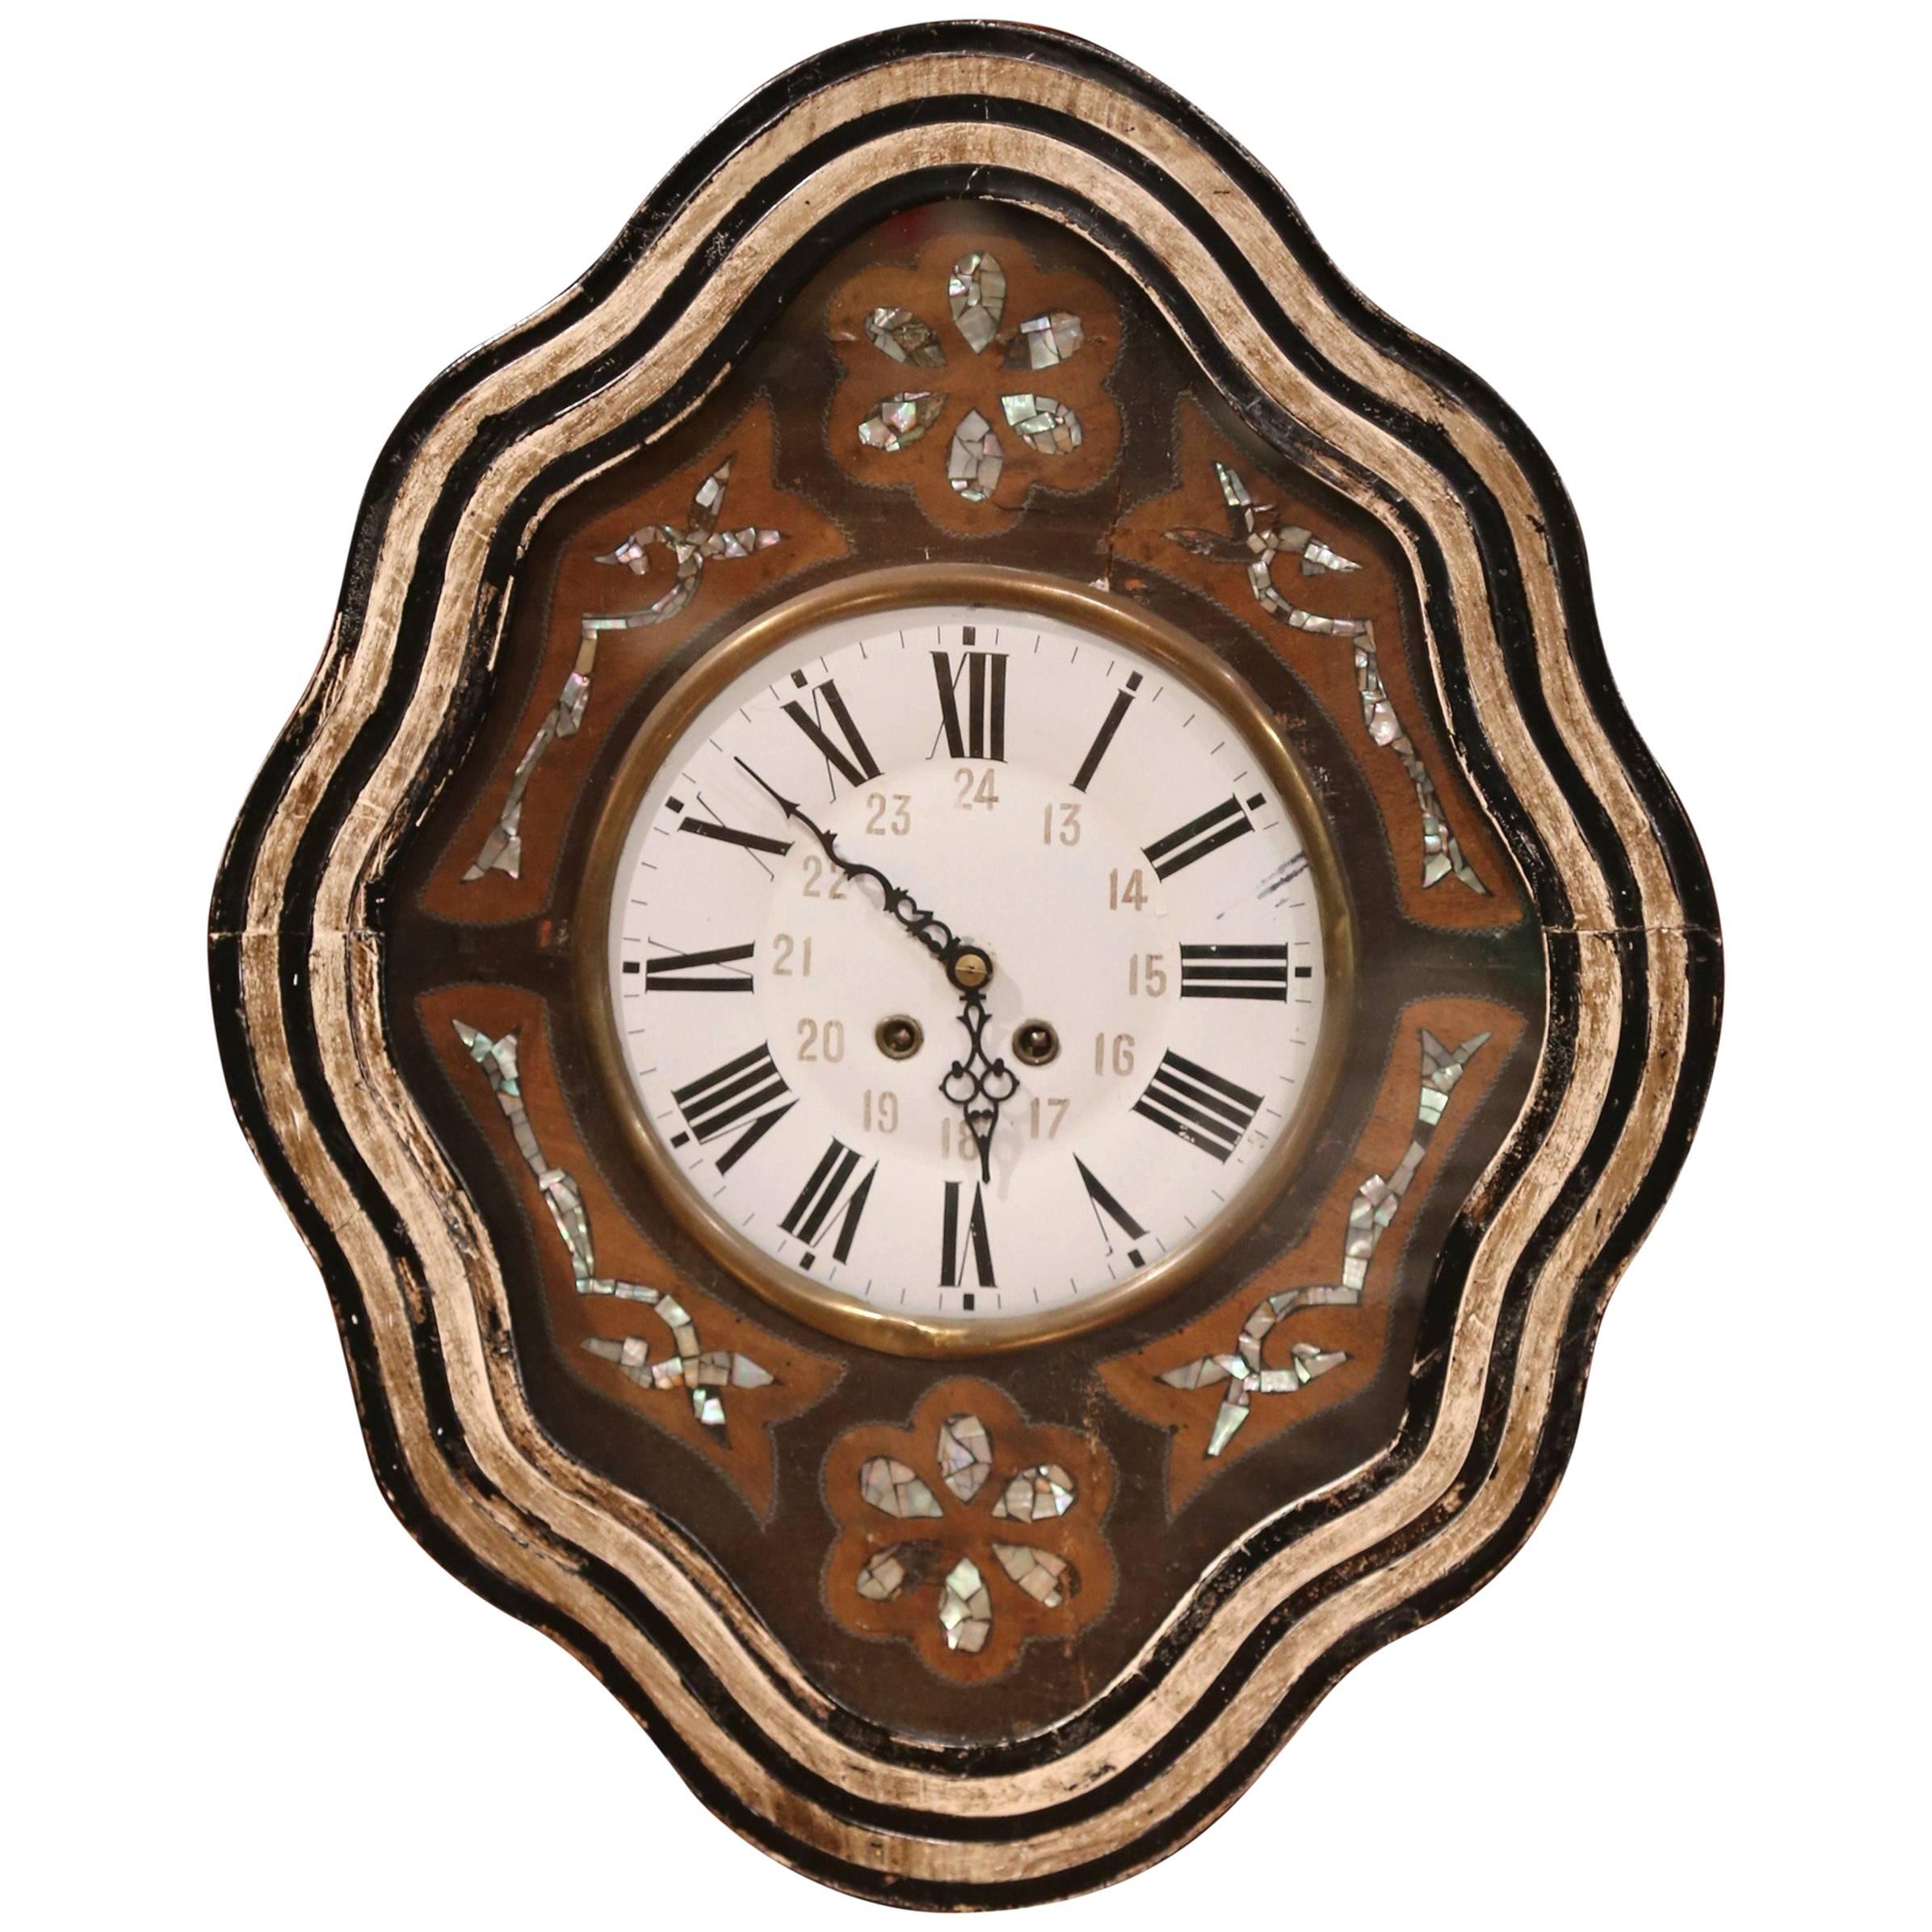 19th Century French Napoleon III Painted Wall Clock with Mother-of-Pearl Decor